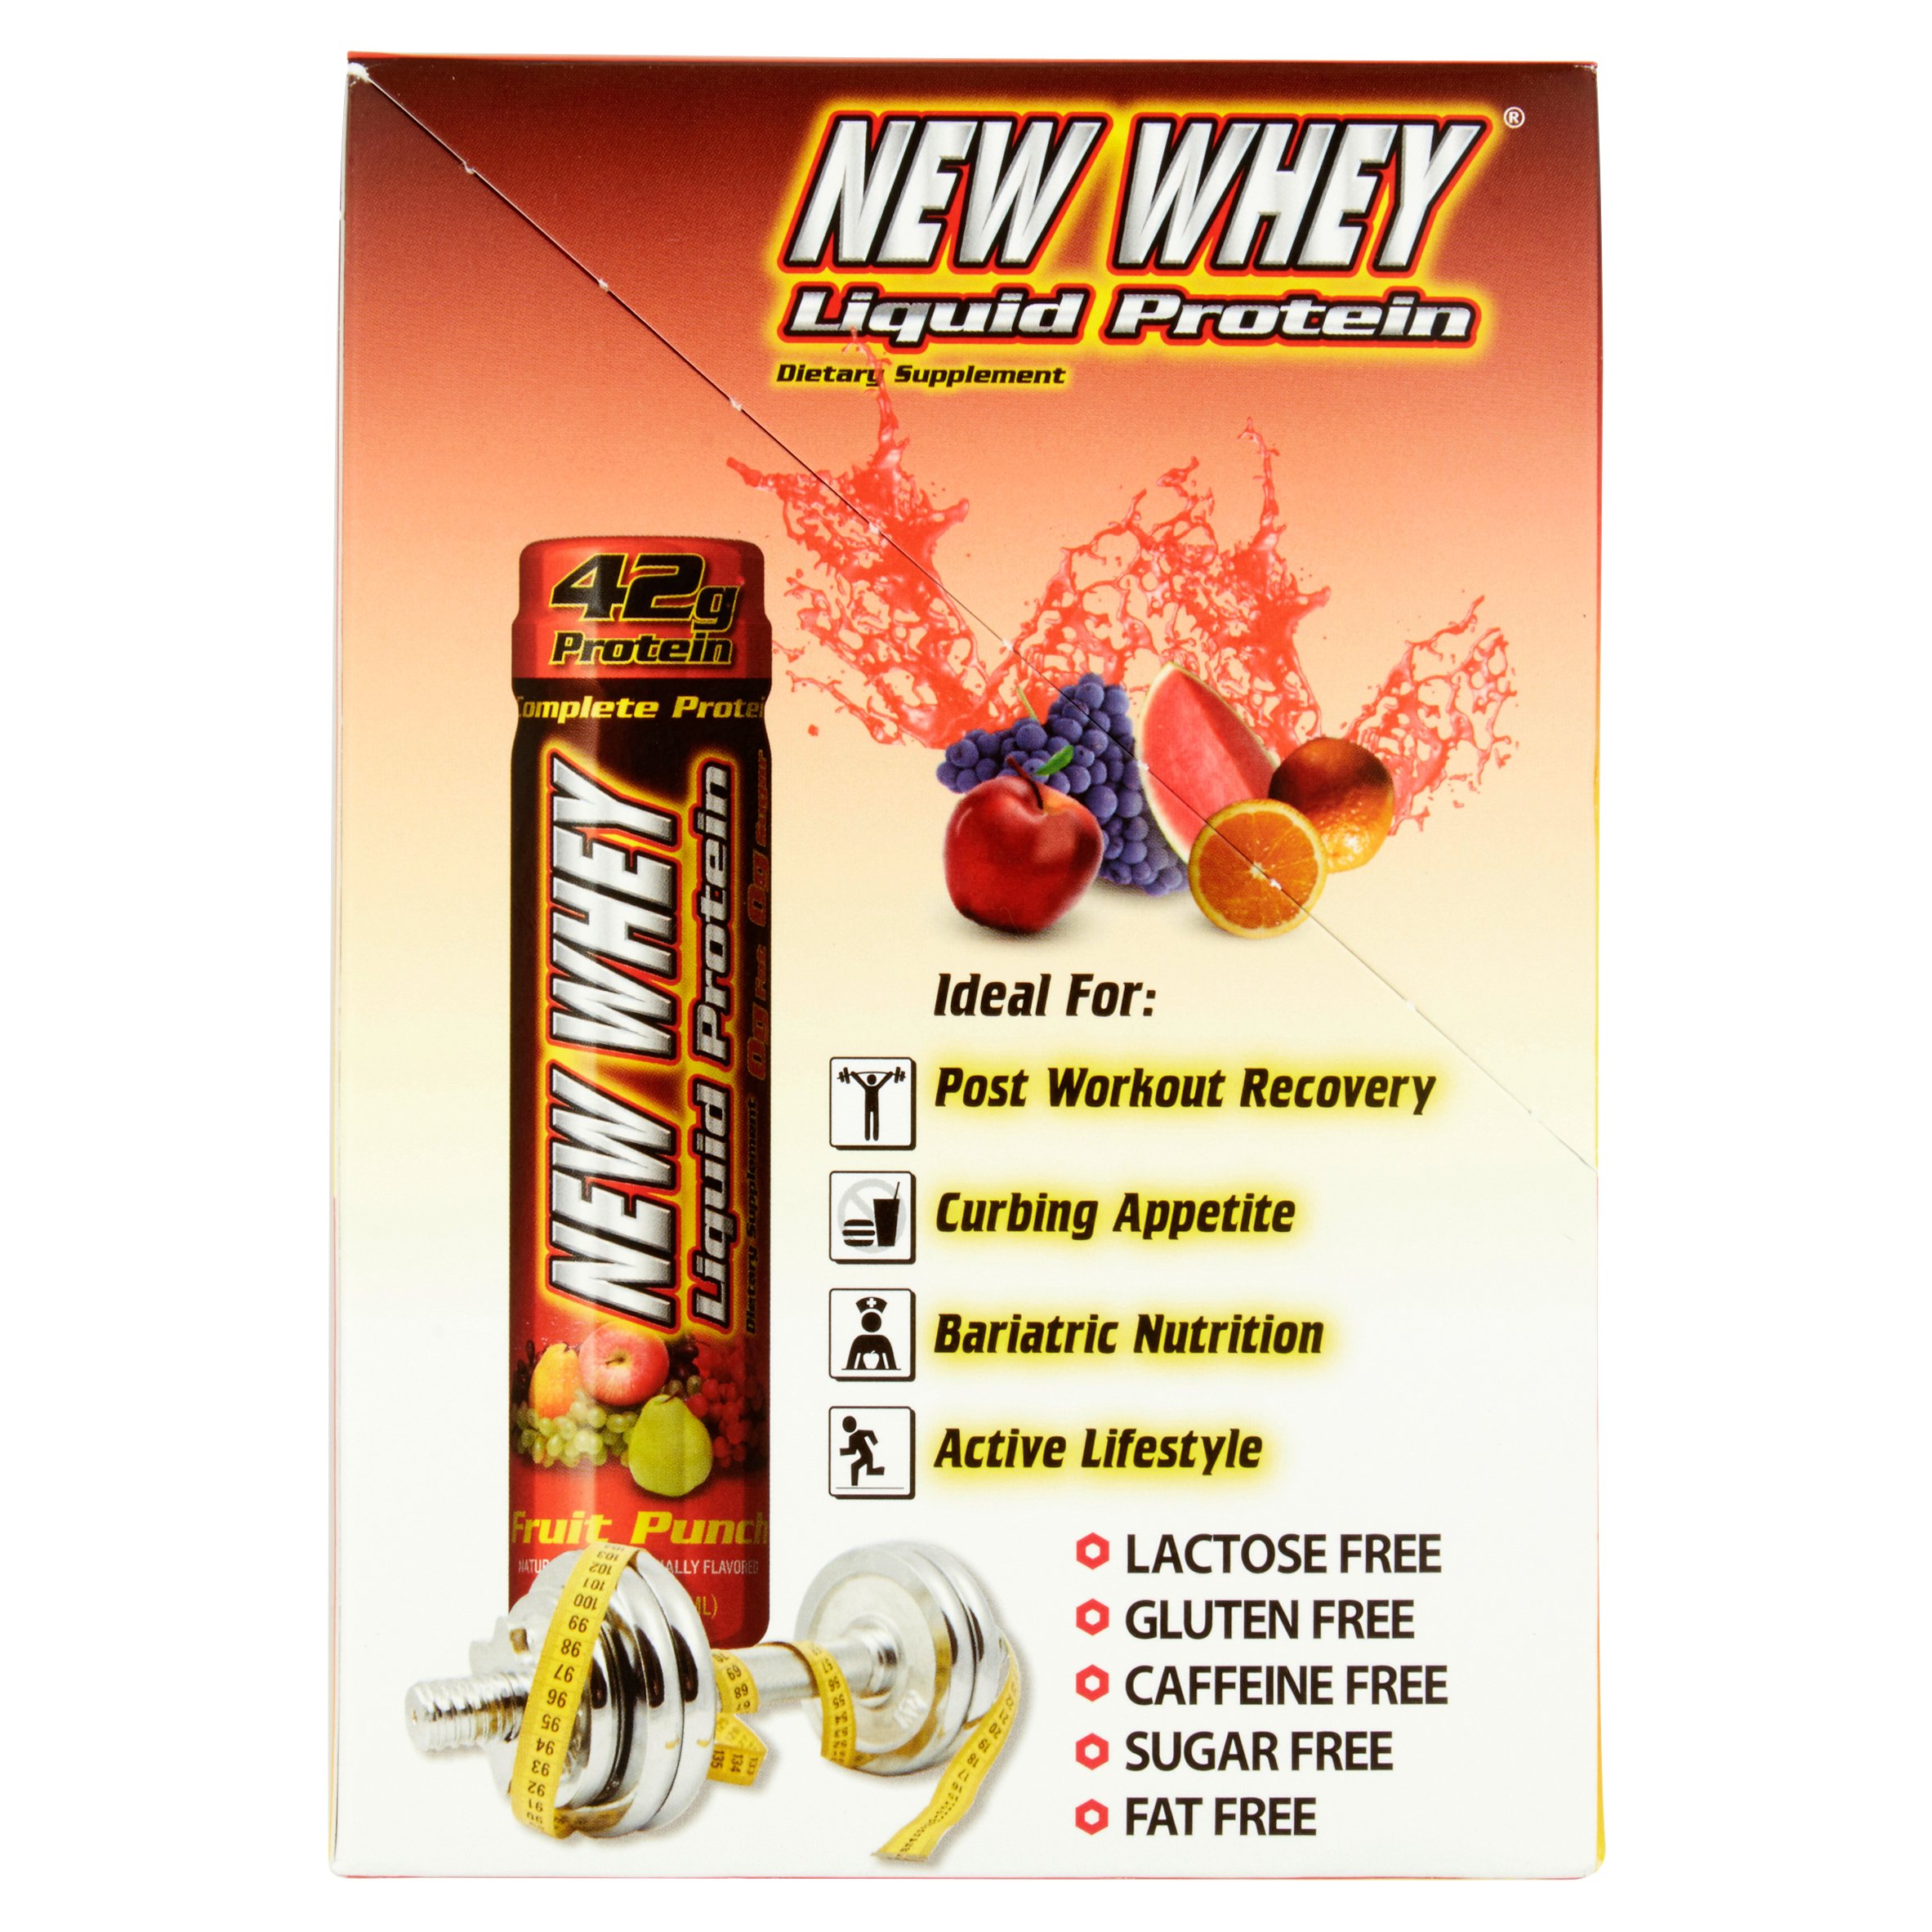 New Whey Protein Drink, 42 Grams of Protein, Fruit Punch, 3.8 Oz, 6 Ct - image 4 of 5